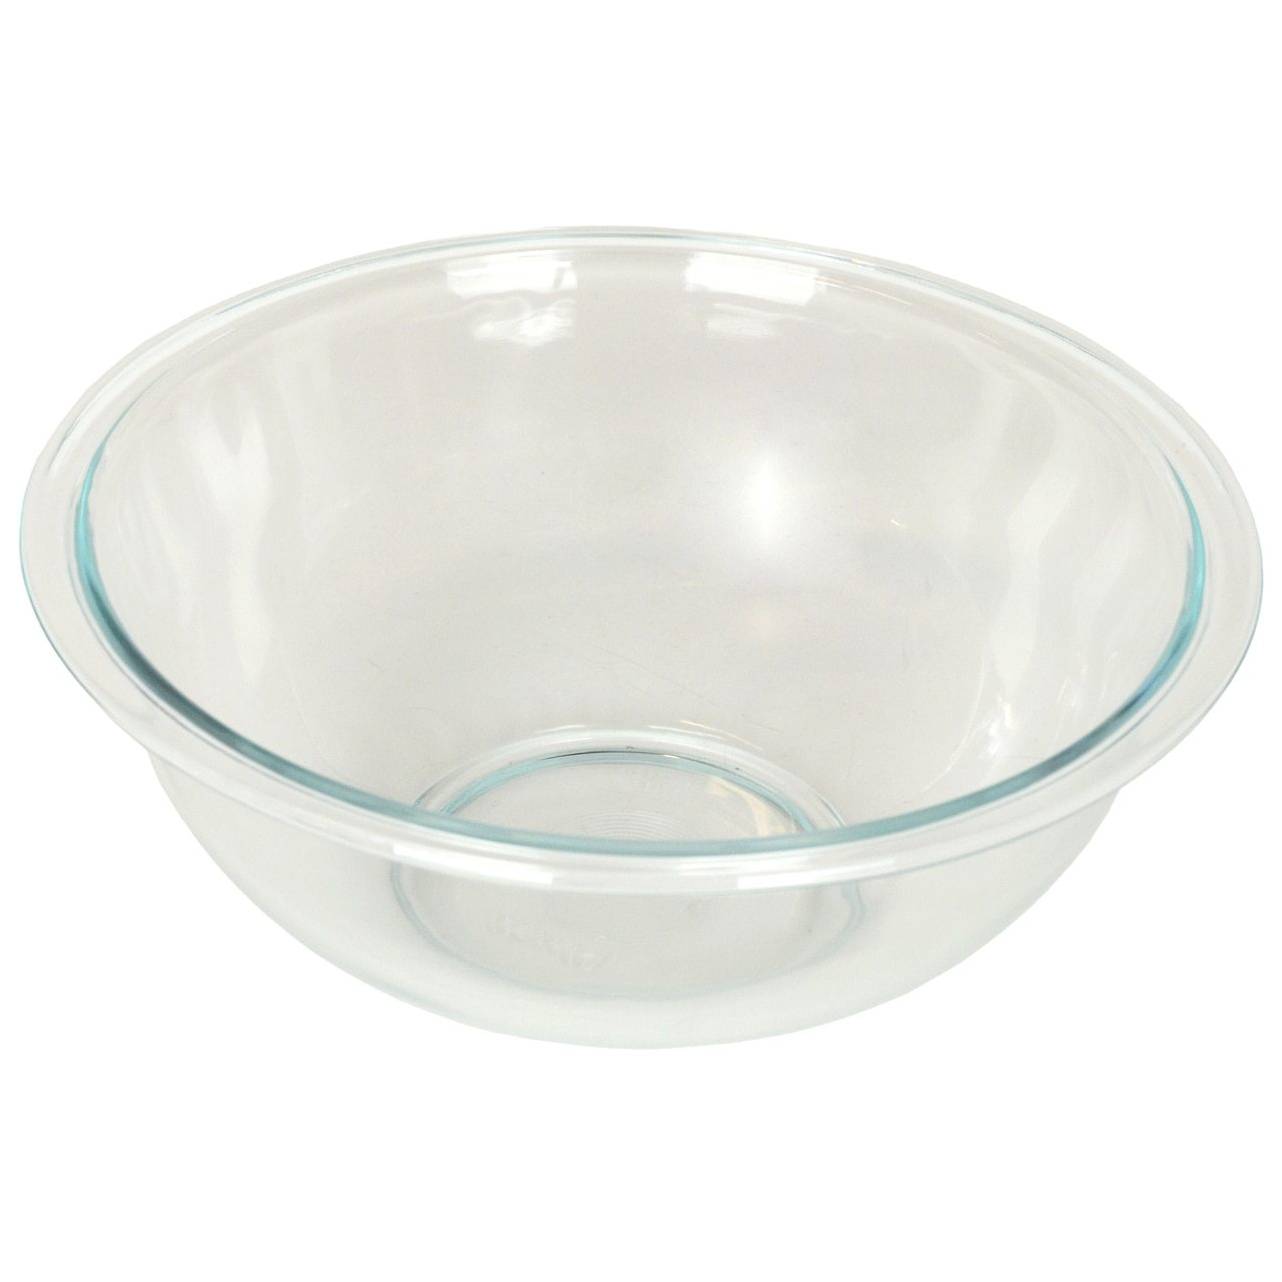 Best mixing bowls - for baking, kitchen tasks and more | olivemagazine